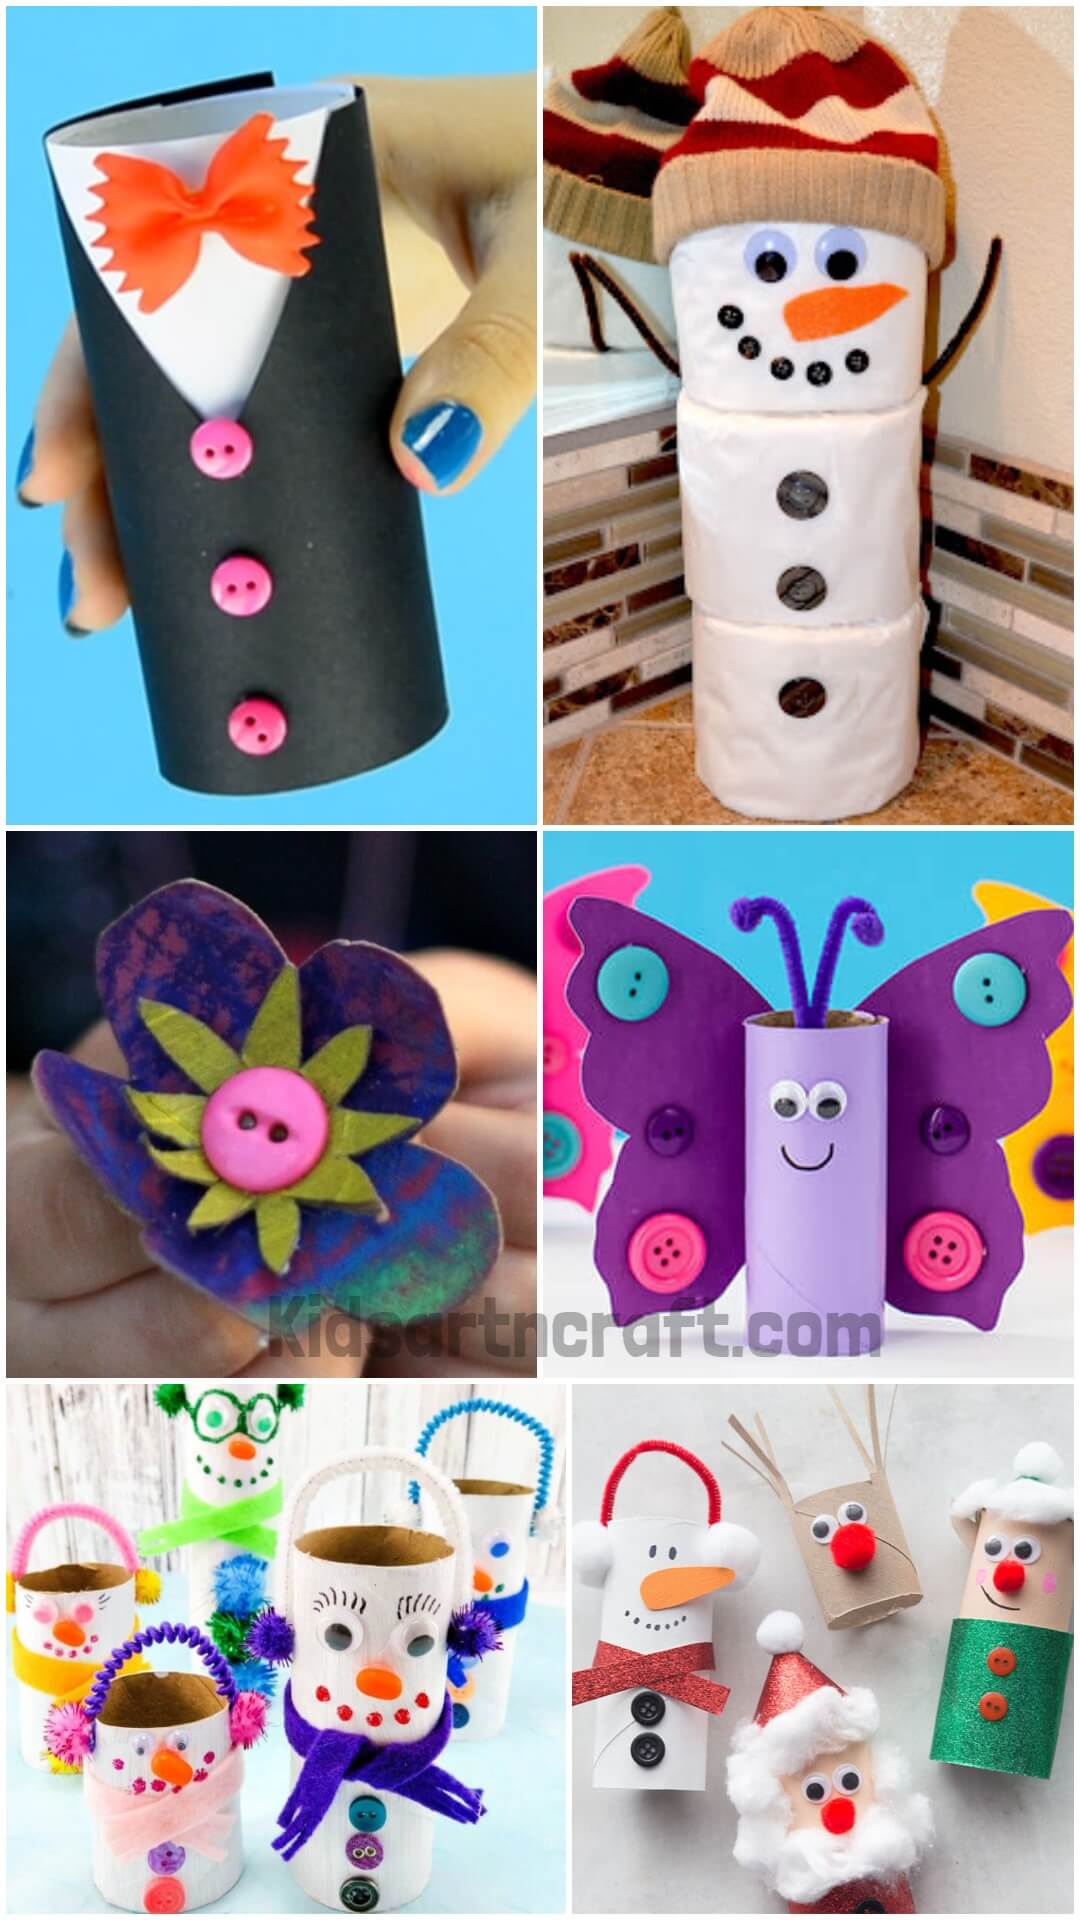 Button Craft Using toilet paper roll